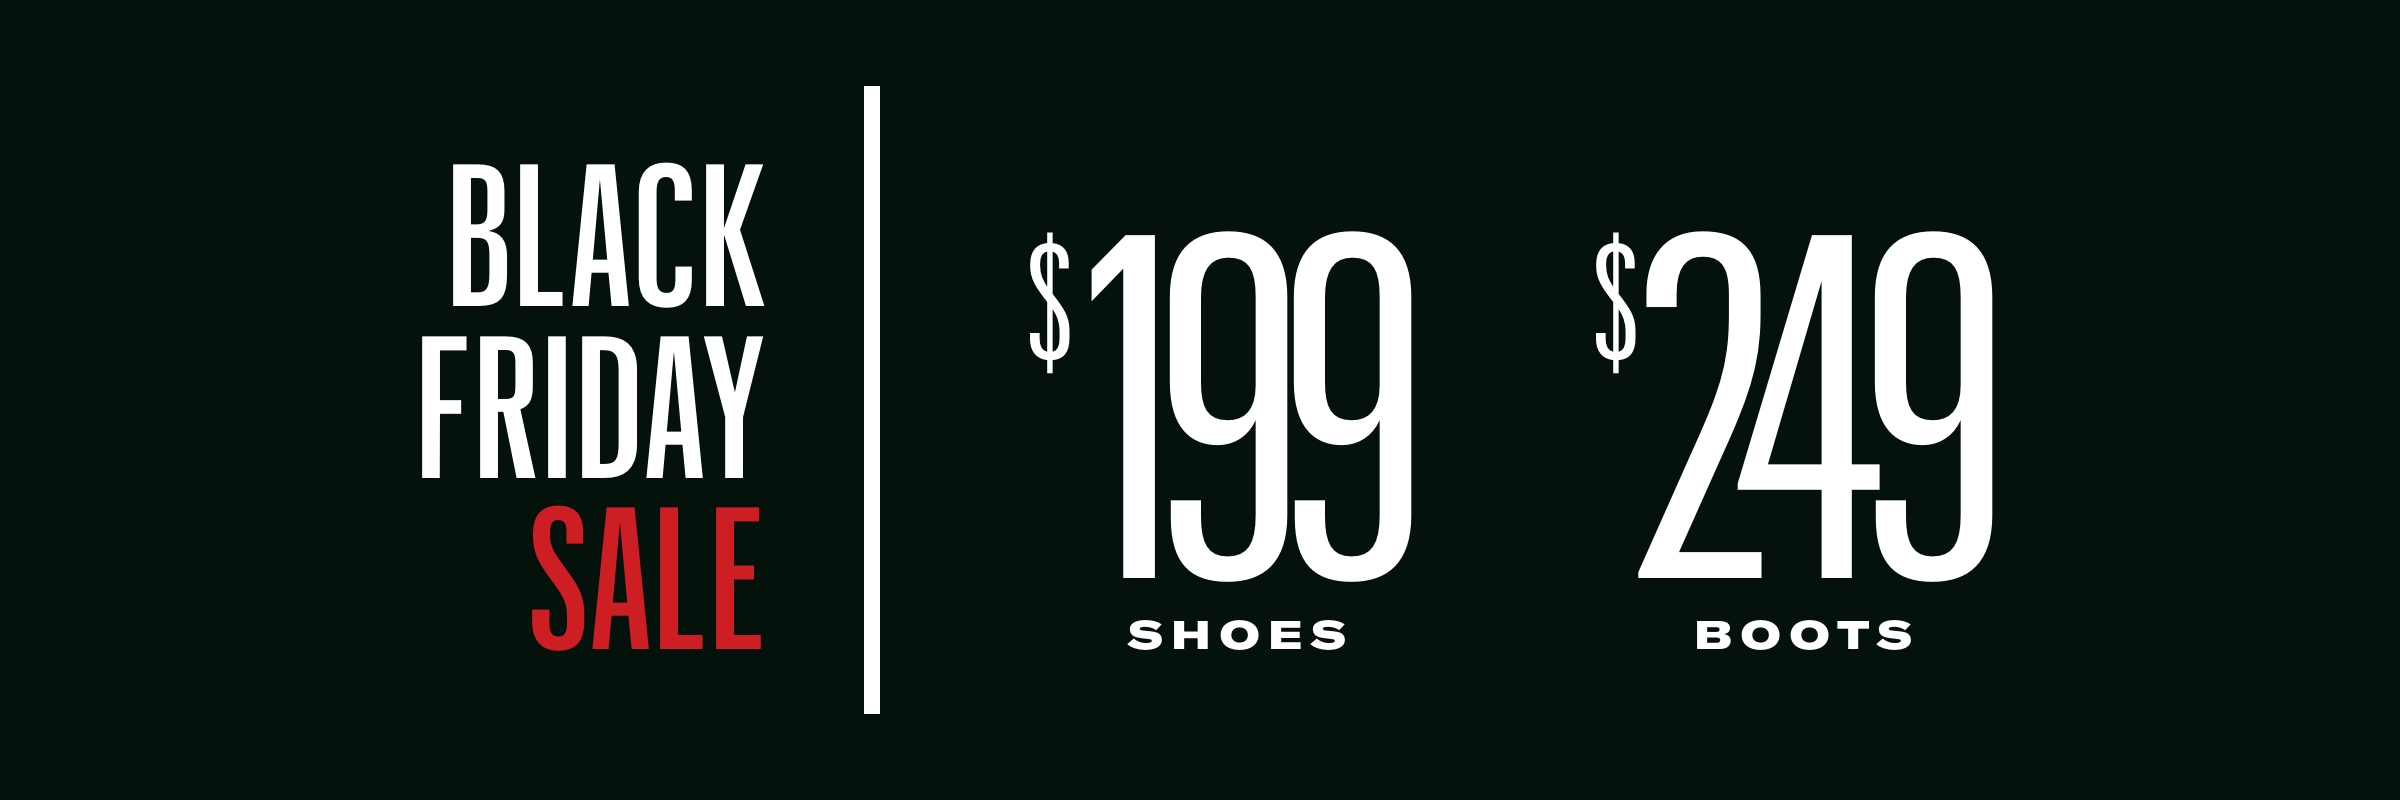 Black Friday Sale - $199 Shoes, $249 Boots